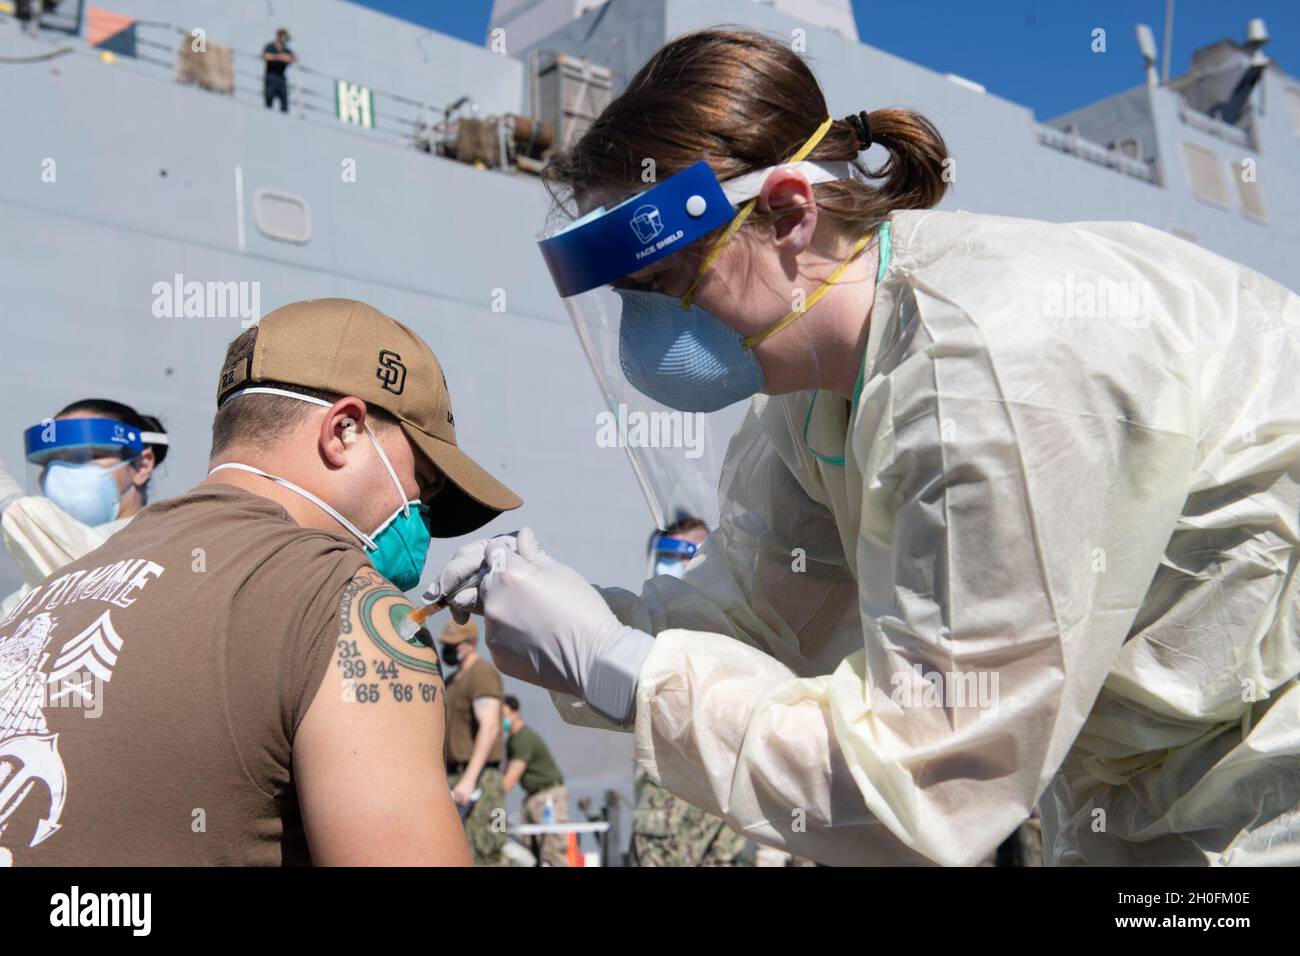 210226-N-FO865-3063     MANAMA, Bahrain (Feb. 26, 2021) – Lt. Emily Goodwin, right, a doctor assigned to Navy Medicine Readiness and Training Unit Bahrain, administers the COVID-19 vaccine to Personnel Specialist 2nd Class Arnold McQuade, assigned to amphibious transport dock ship USS San Diego (LPD 22), in Manama, Bahrain, Feb. 26. San Diego, part of the Makin Island Amphibious Ready Group, and the 15th Marine Expeditionary Unit are deployed to the U.S. 5th Fleet area of operations in support of naval operations to ensure maritime stability and security in the Central Region, connecting the M Stock Photo